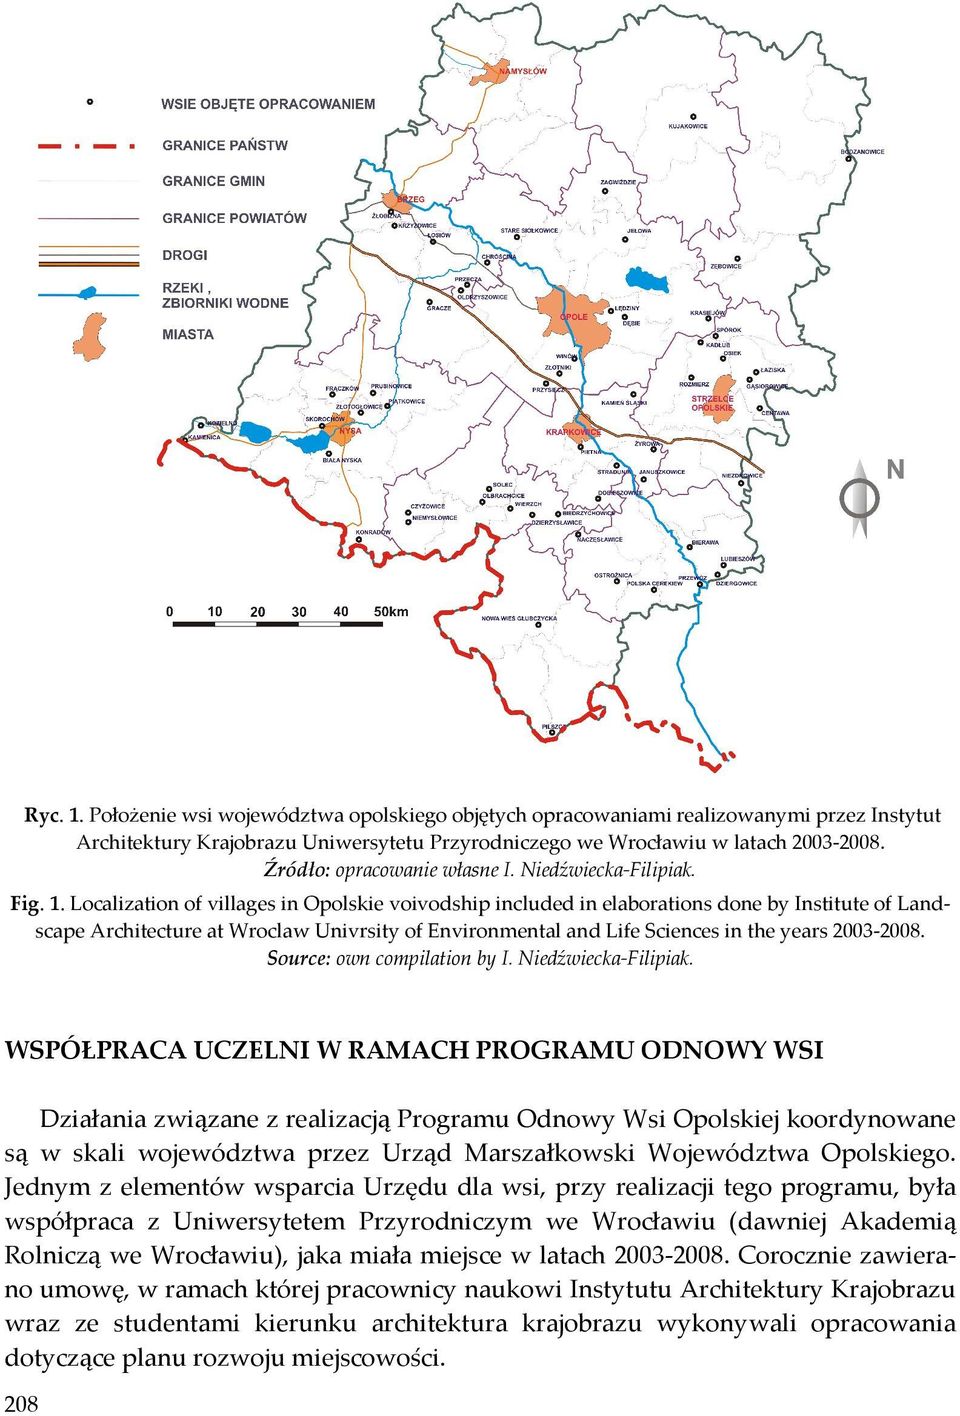 Localization of villages in Opolskie voivodship included in elaborations done by Institute of Landscape Architecture at Wroclaw Univrsity of Environmental and Life Sciences in the years 2003-2008.